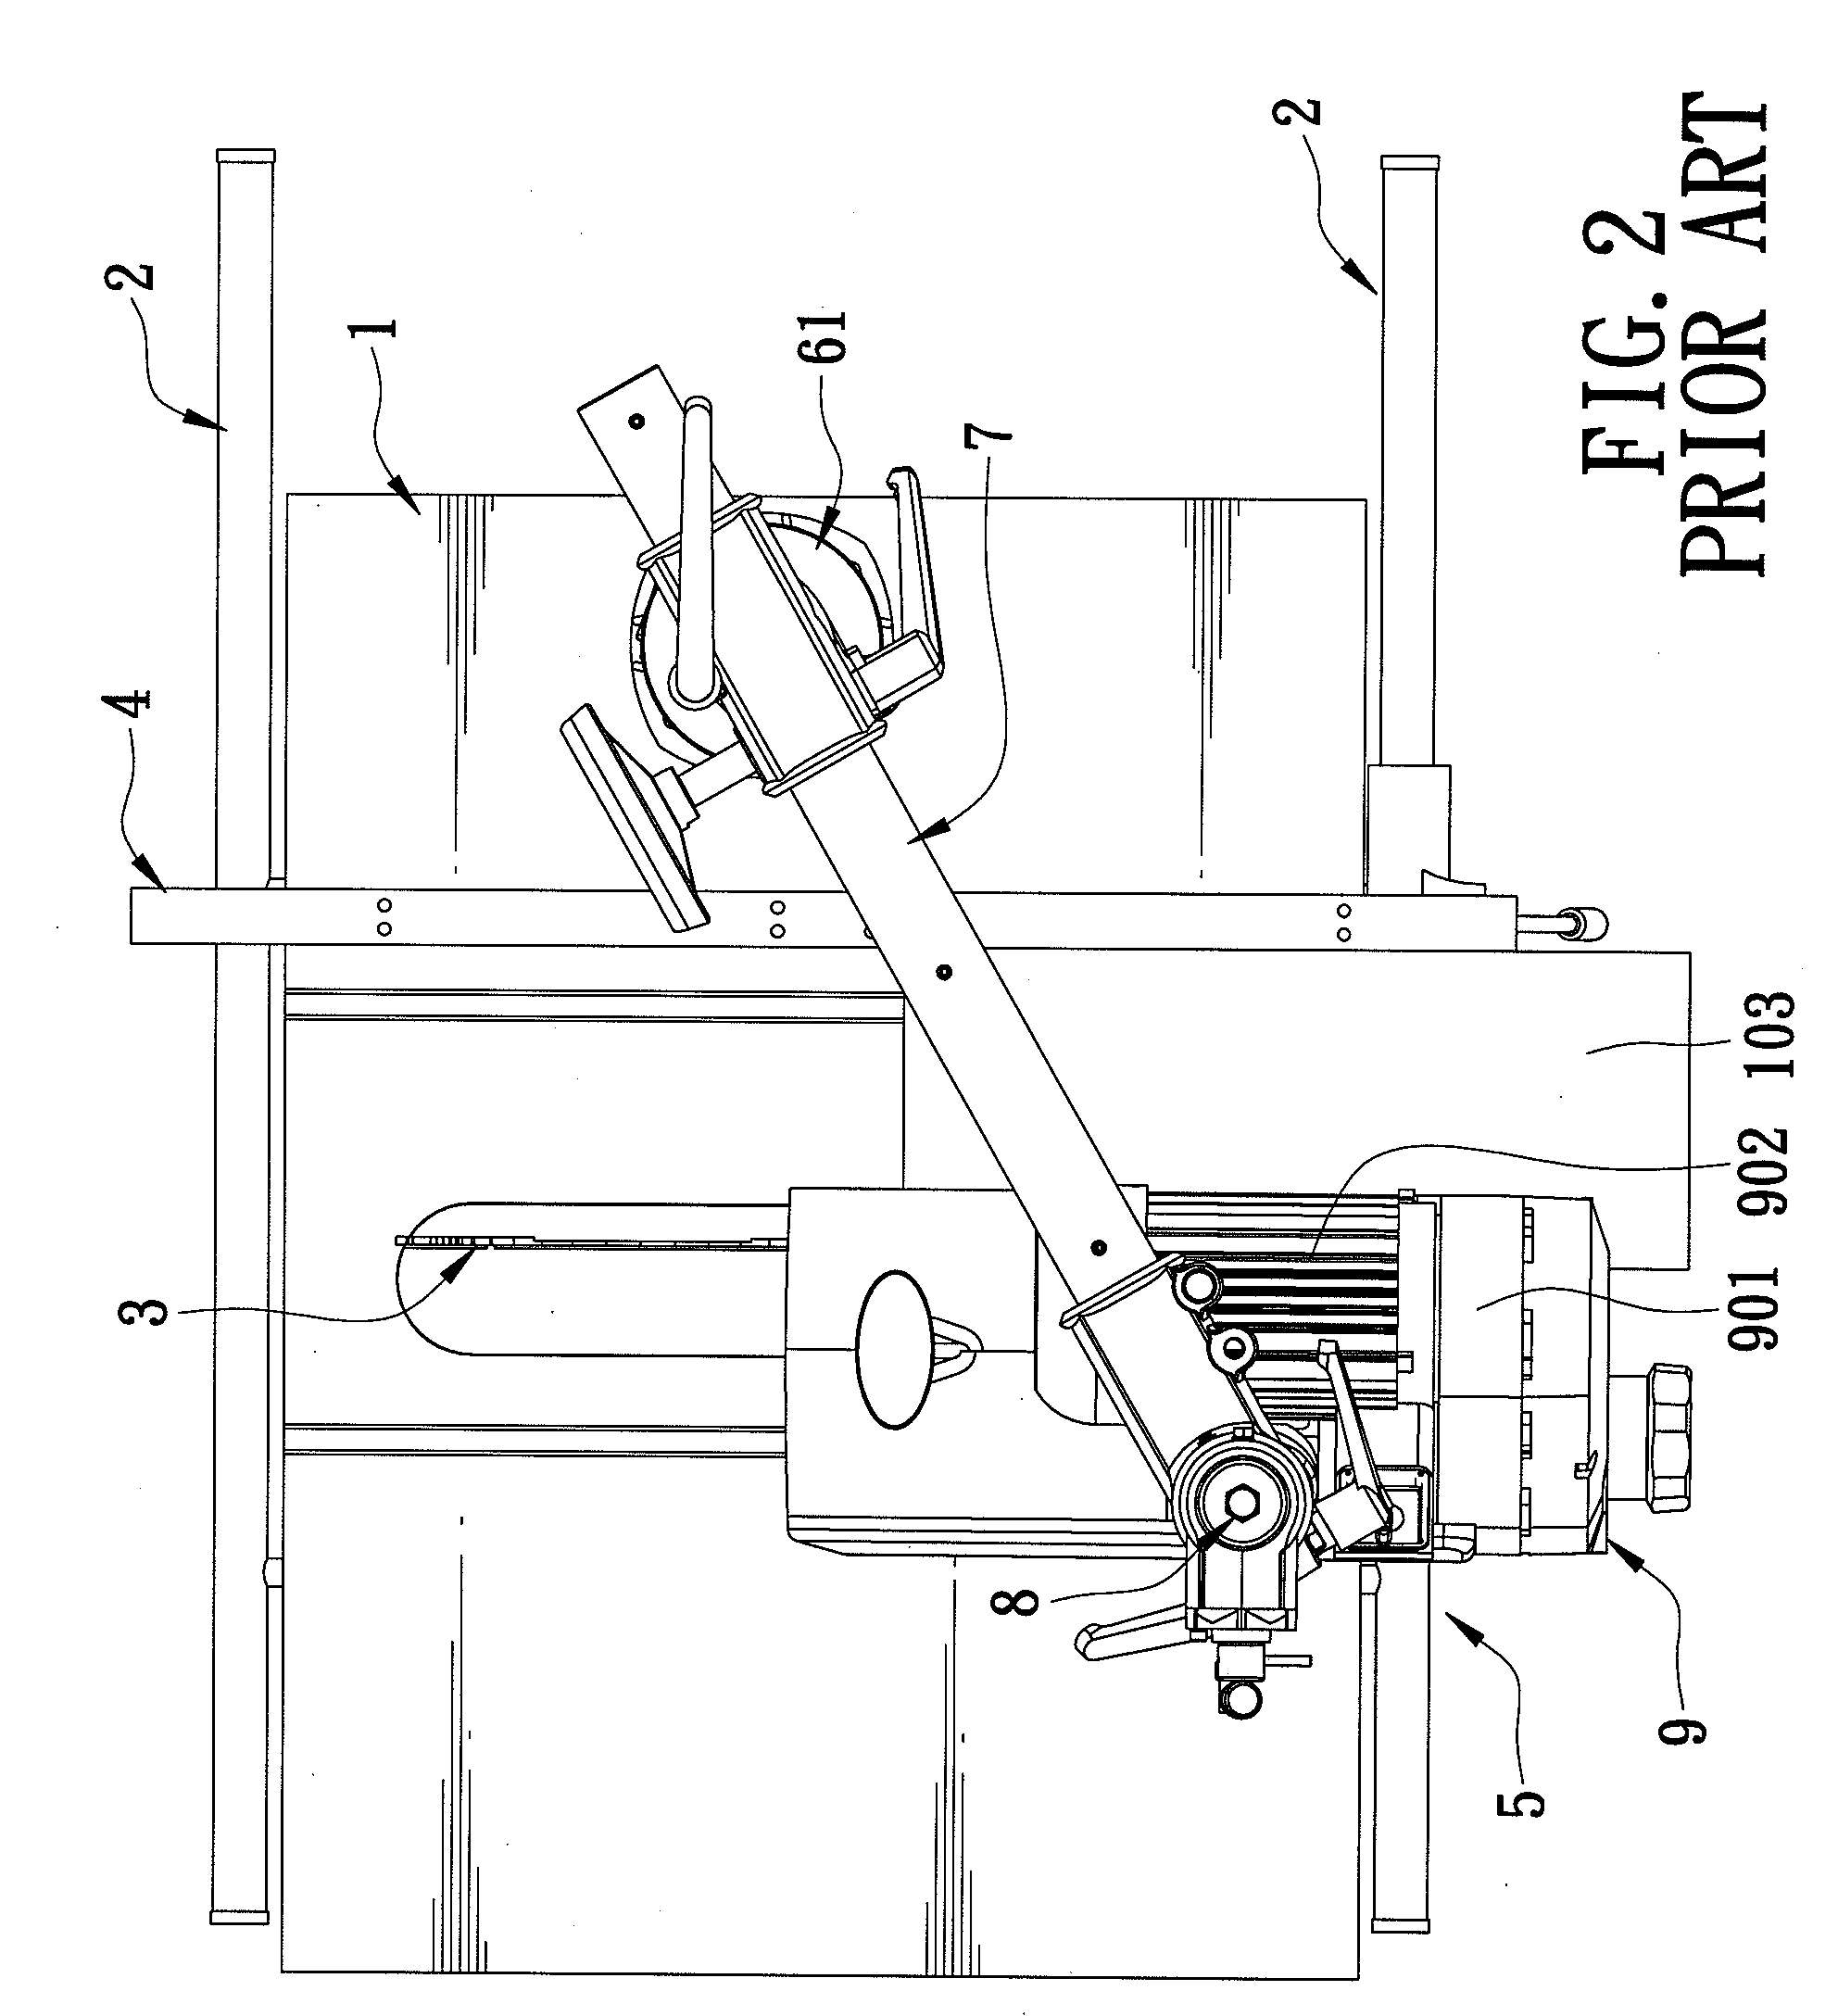 Workpiece-Advancing Device for a Wood Cutting Apparatus